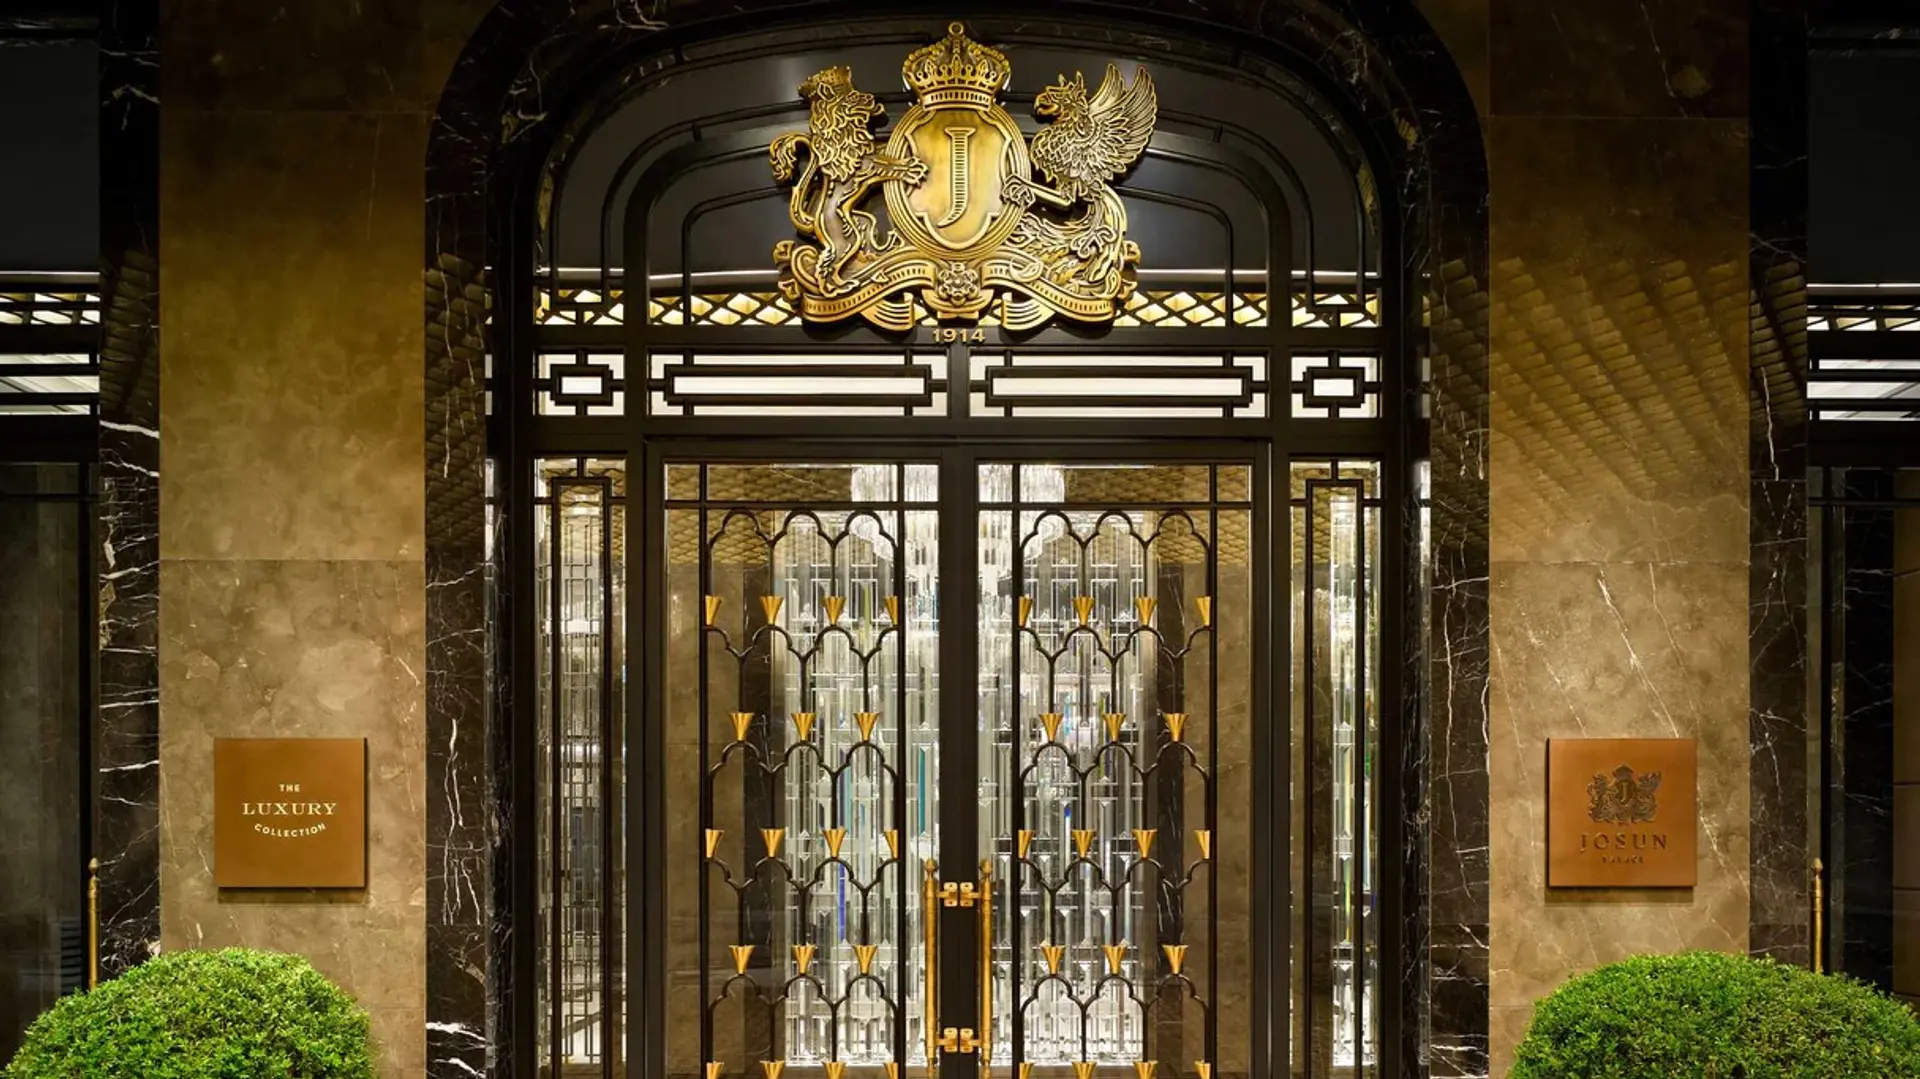 Main entrance of Josun palace, a luxury collection hotel